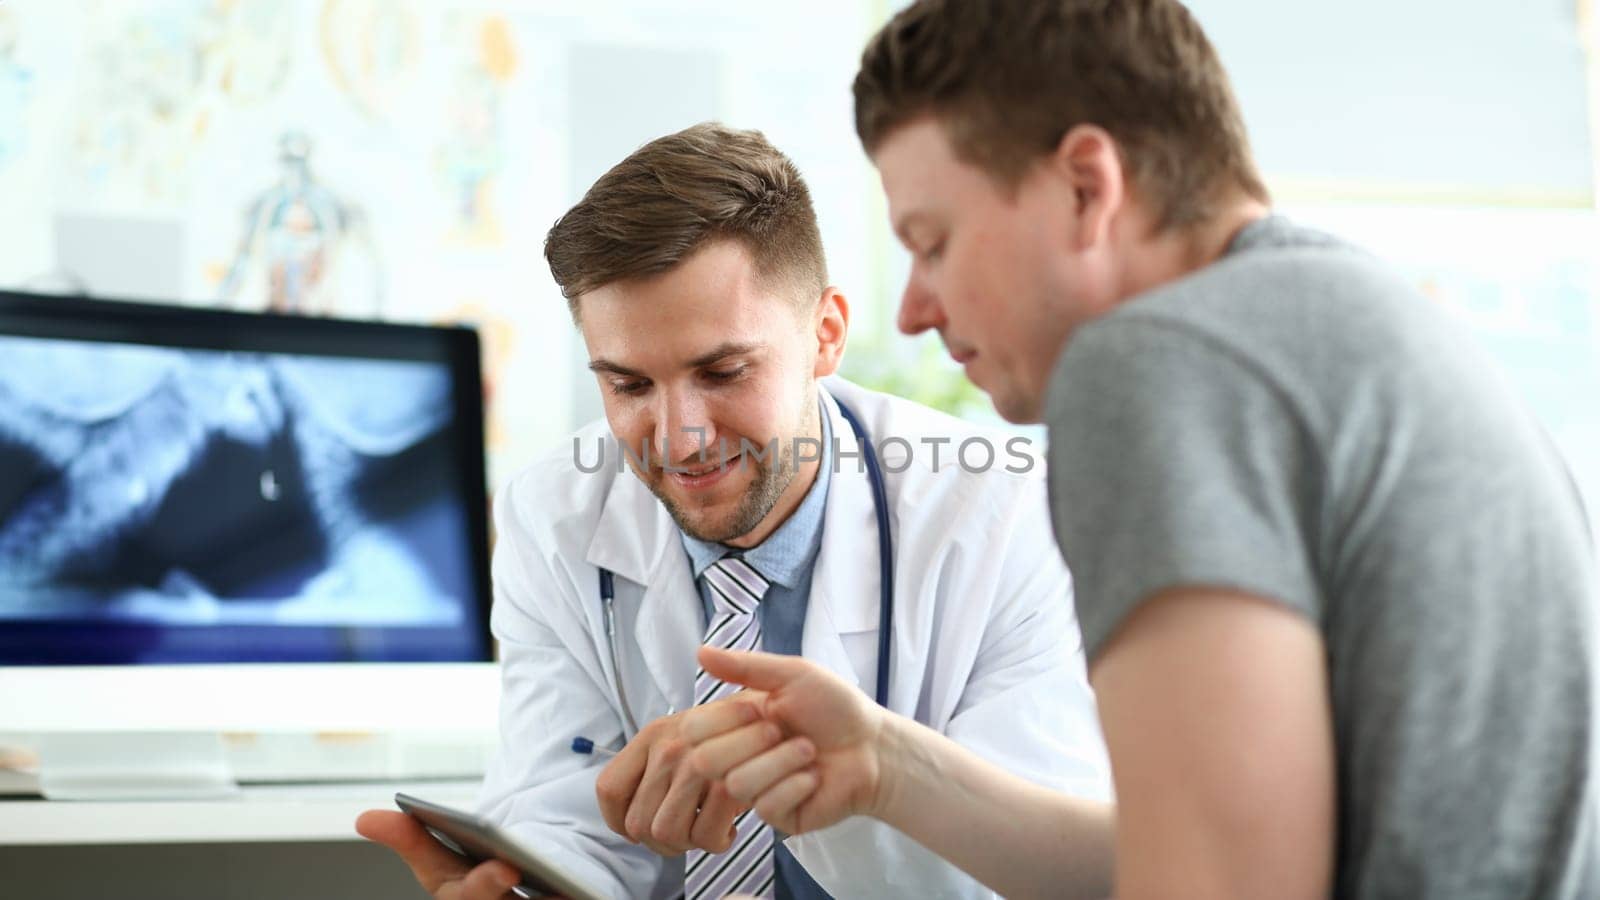 Portrait of smiling doc wearing white uniform with stethoscope. Patient looking to laptop attentively. Medical treatment and health care concept. Blurred background